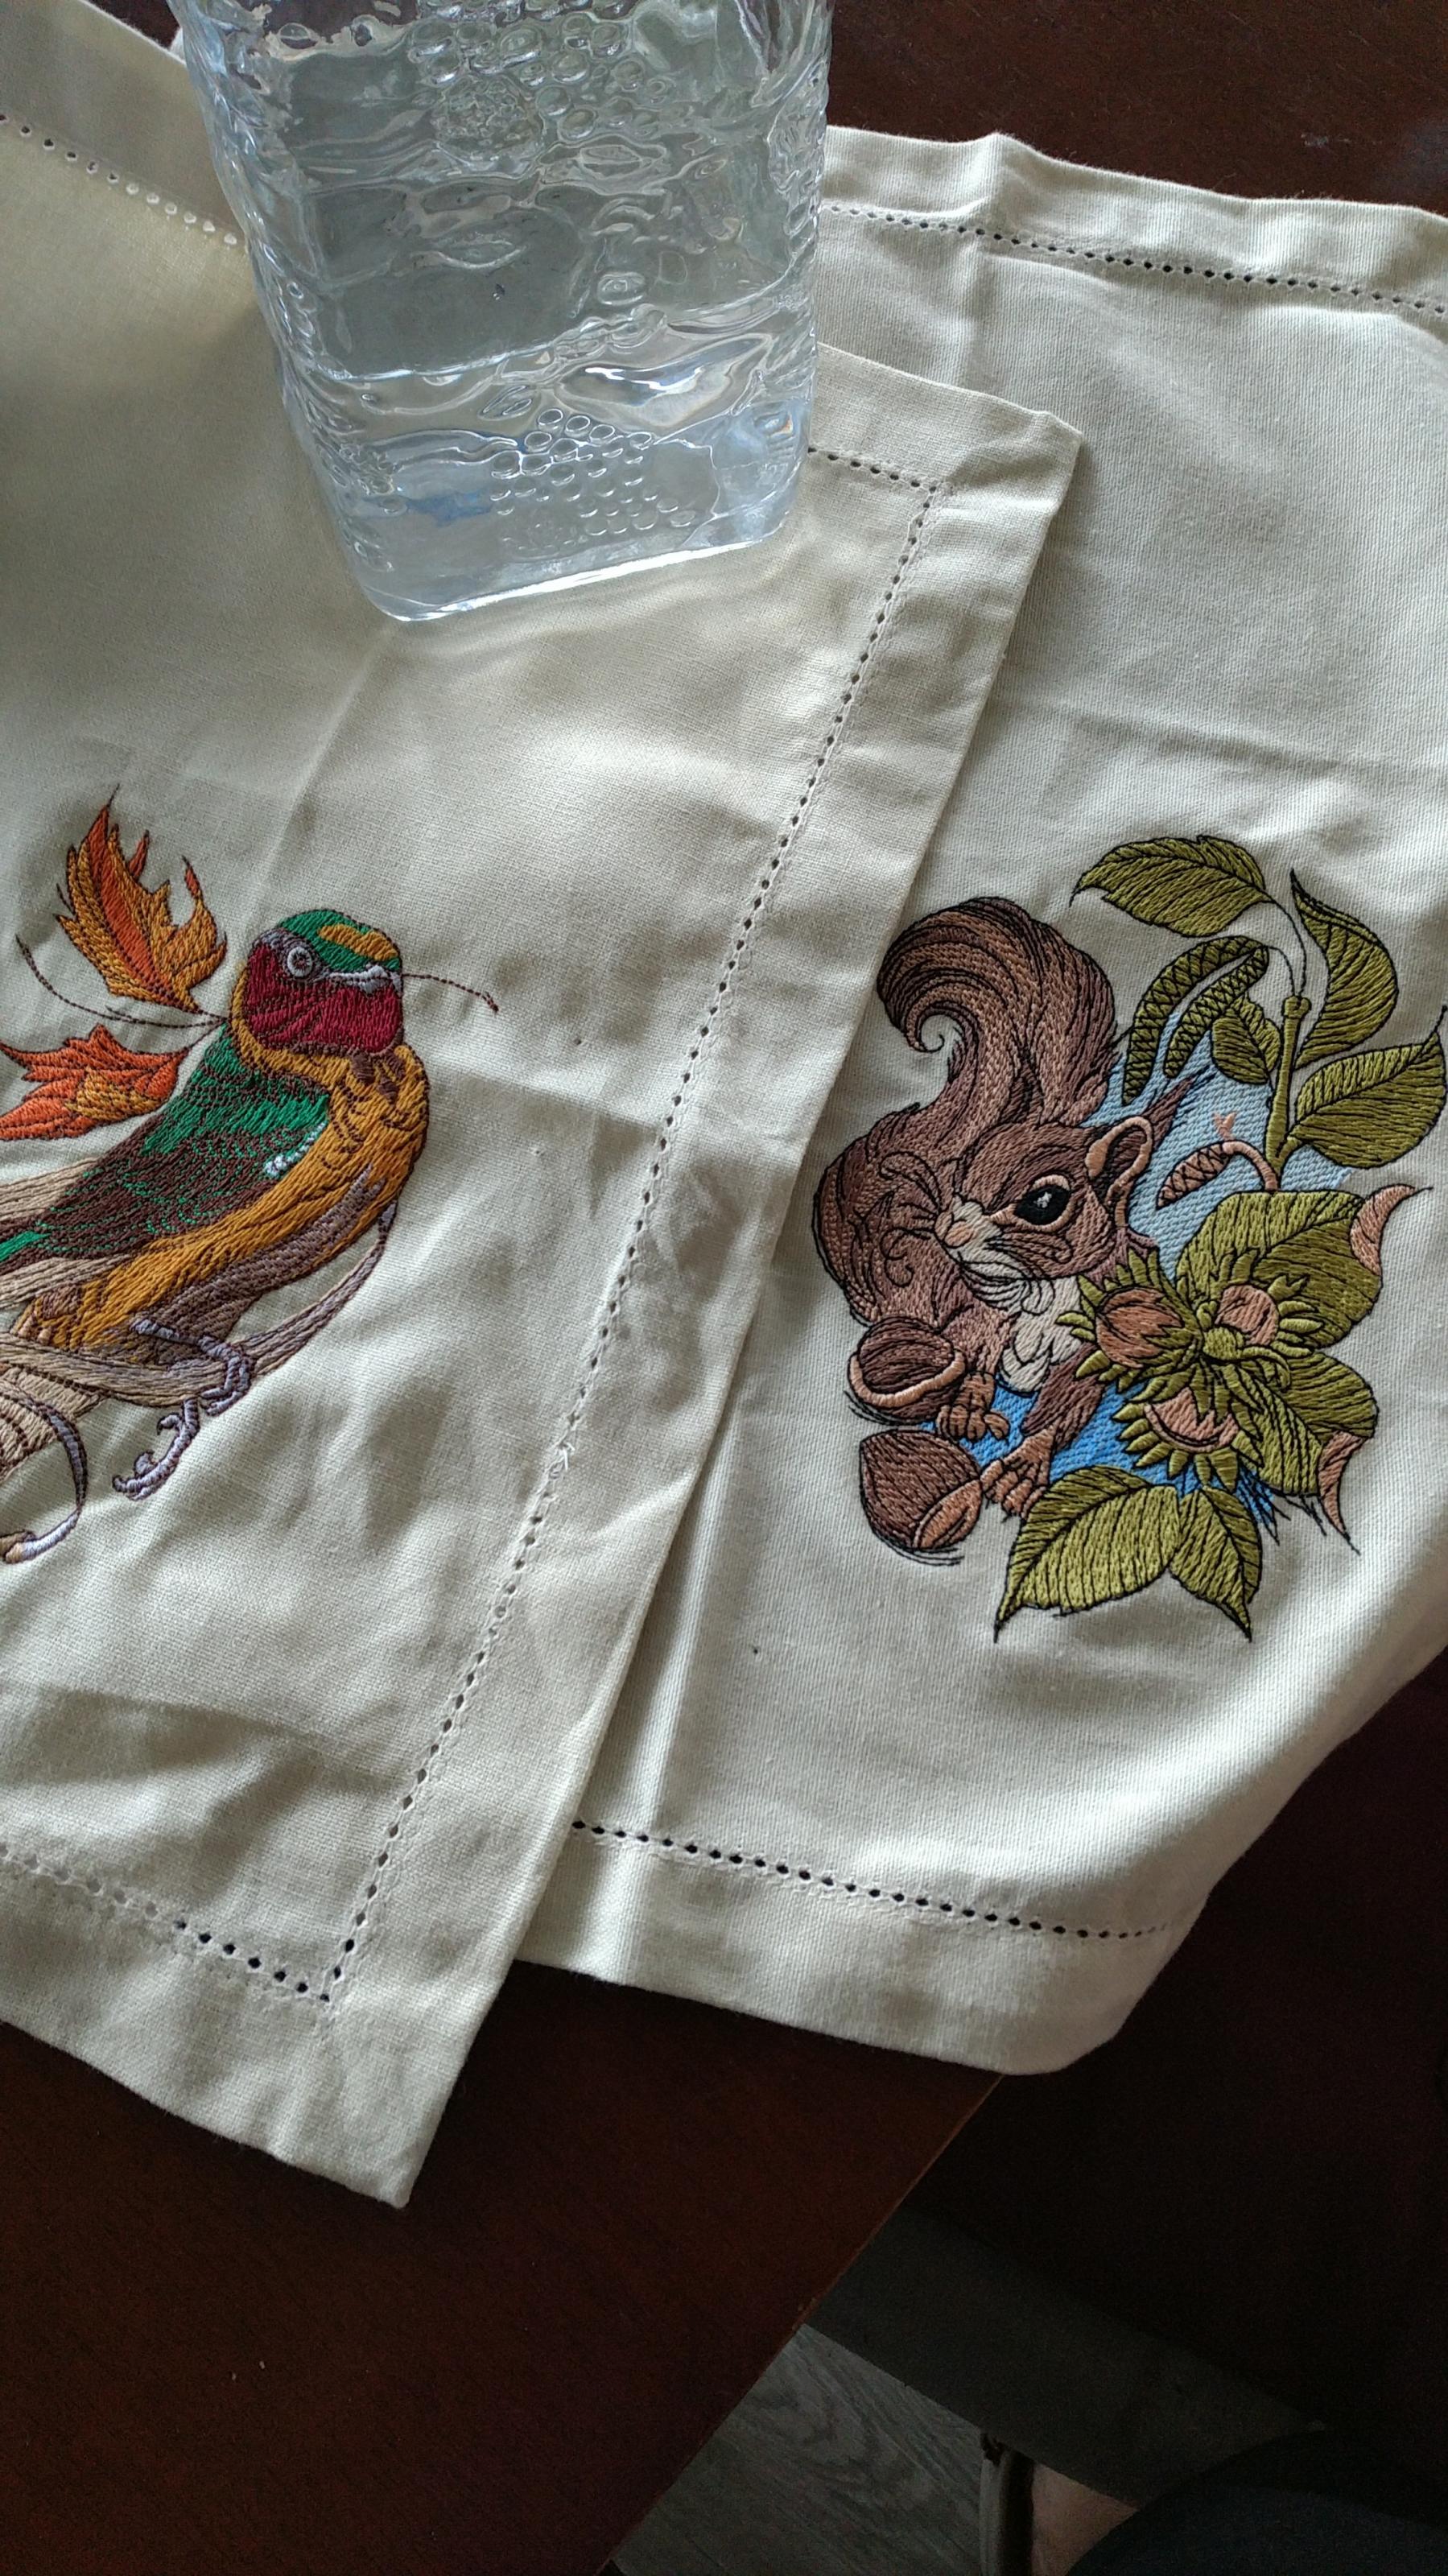 Embroidered napkin with siberian rubythroat and squirrel designs